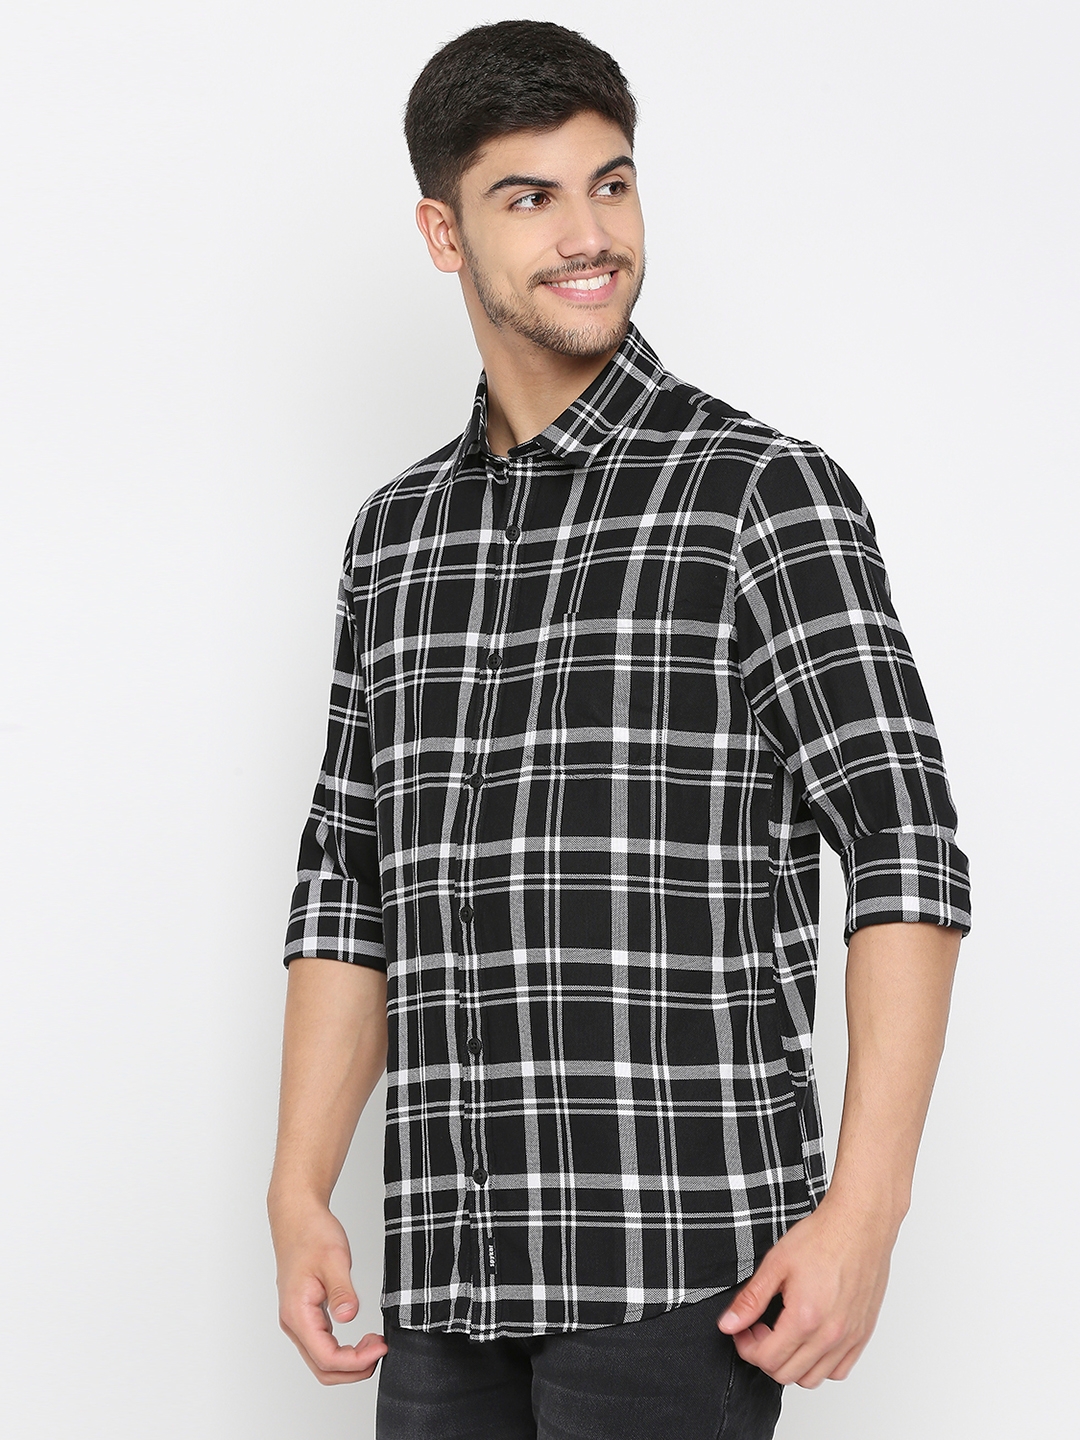 Men's Black Cotton Checked Casual Shirts